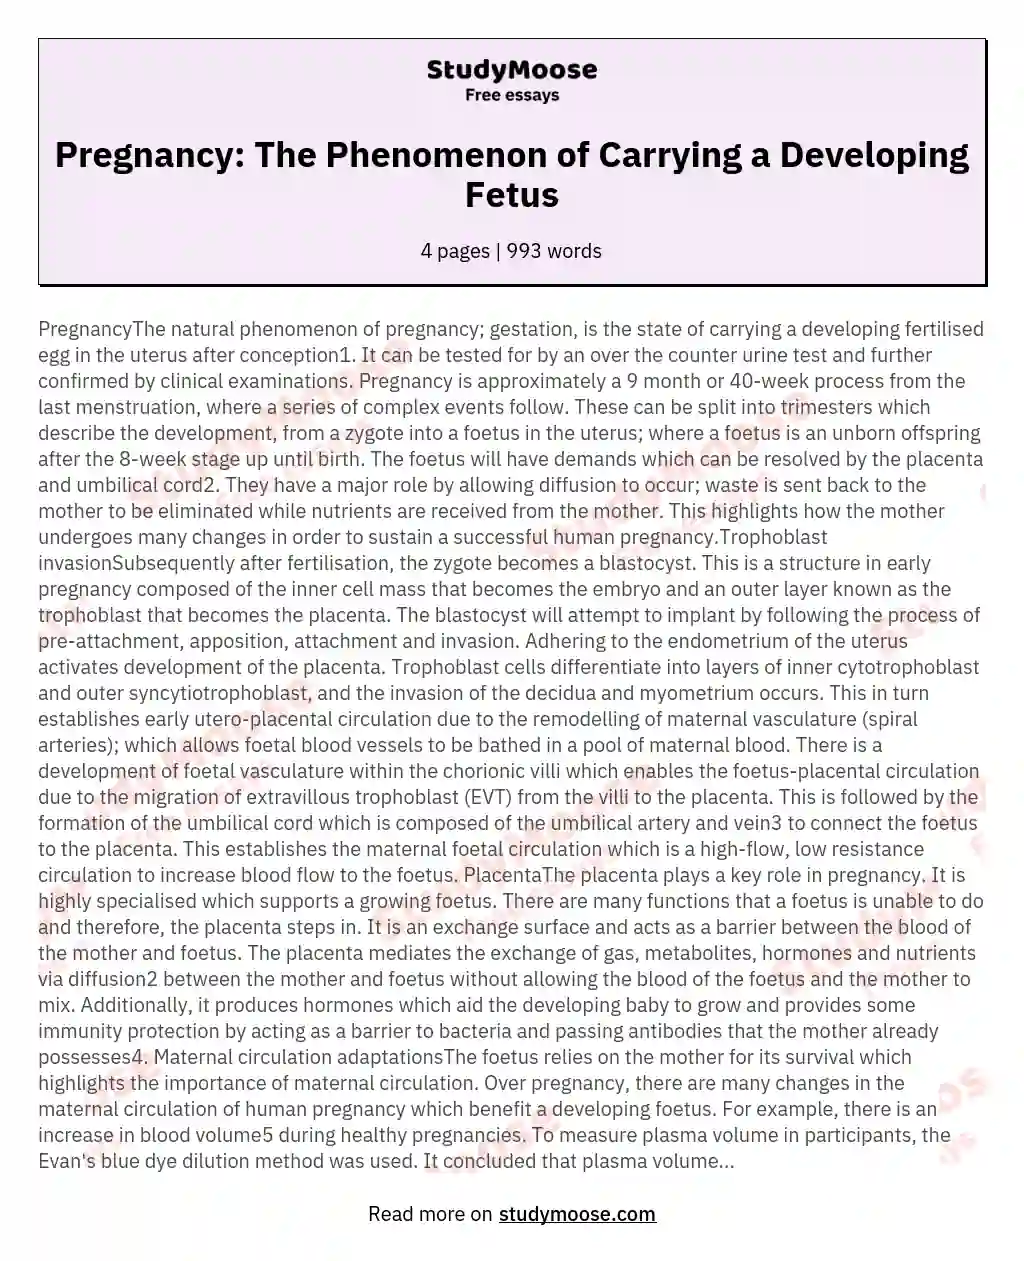 Pregnancy: The Phenomenon of Carrying a Developing Fetus essay